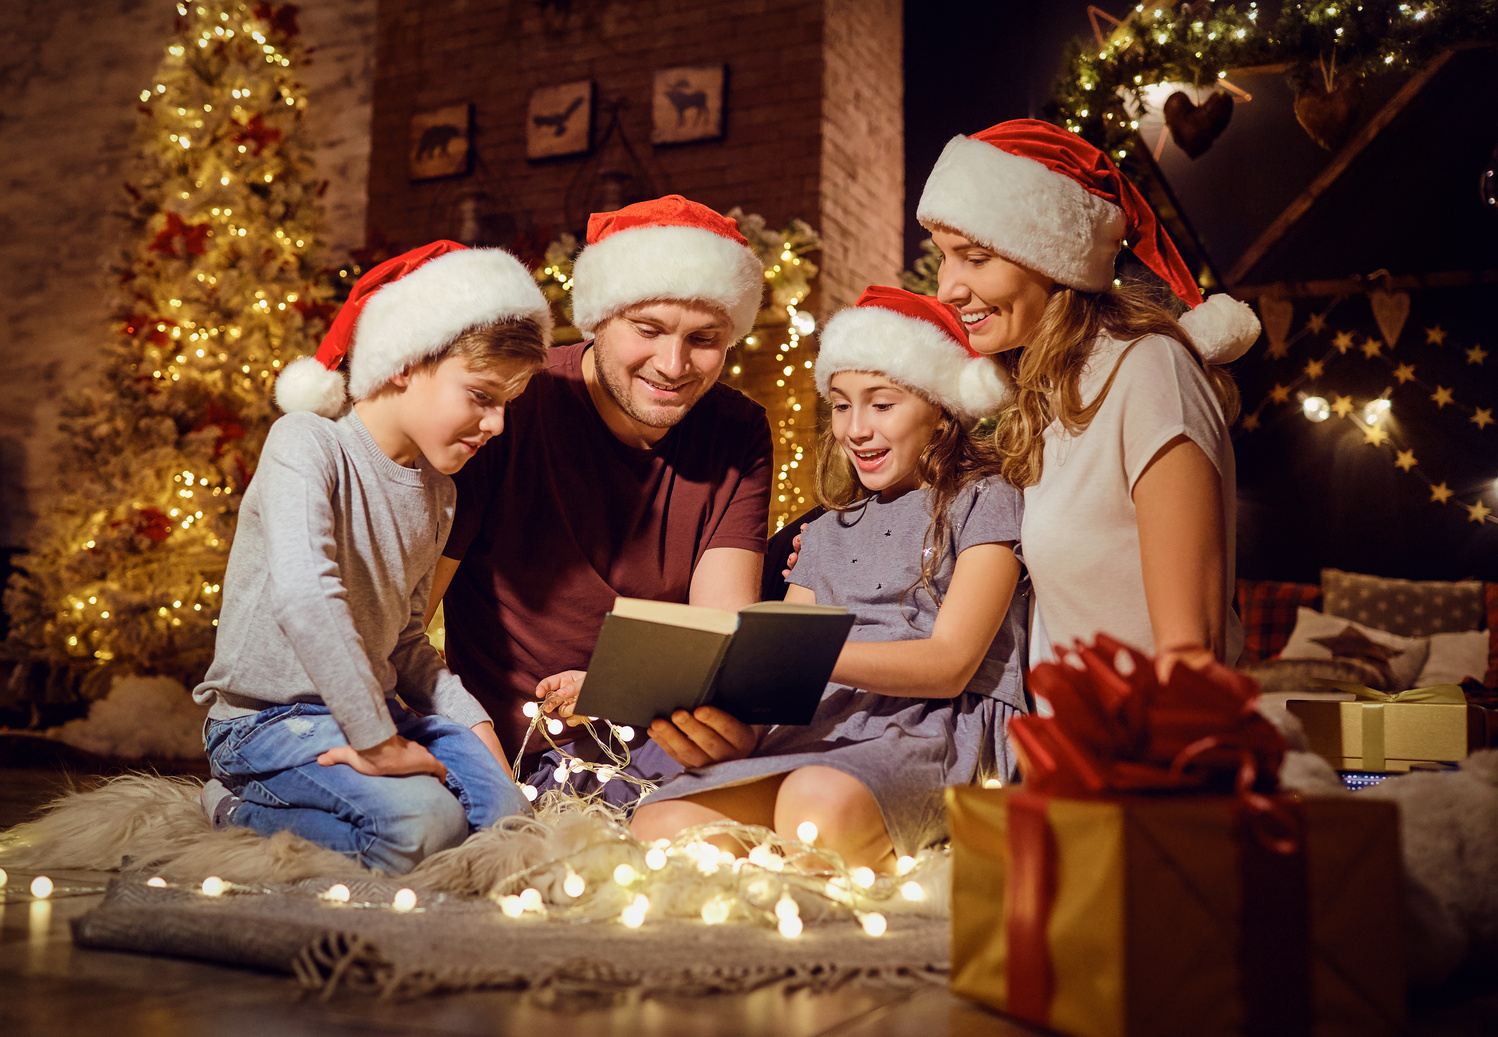 A Family Reads a Book in a Room in Christmas.